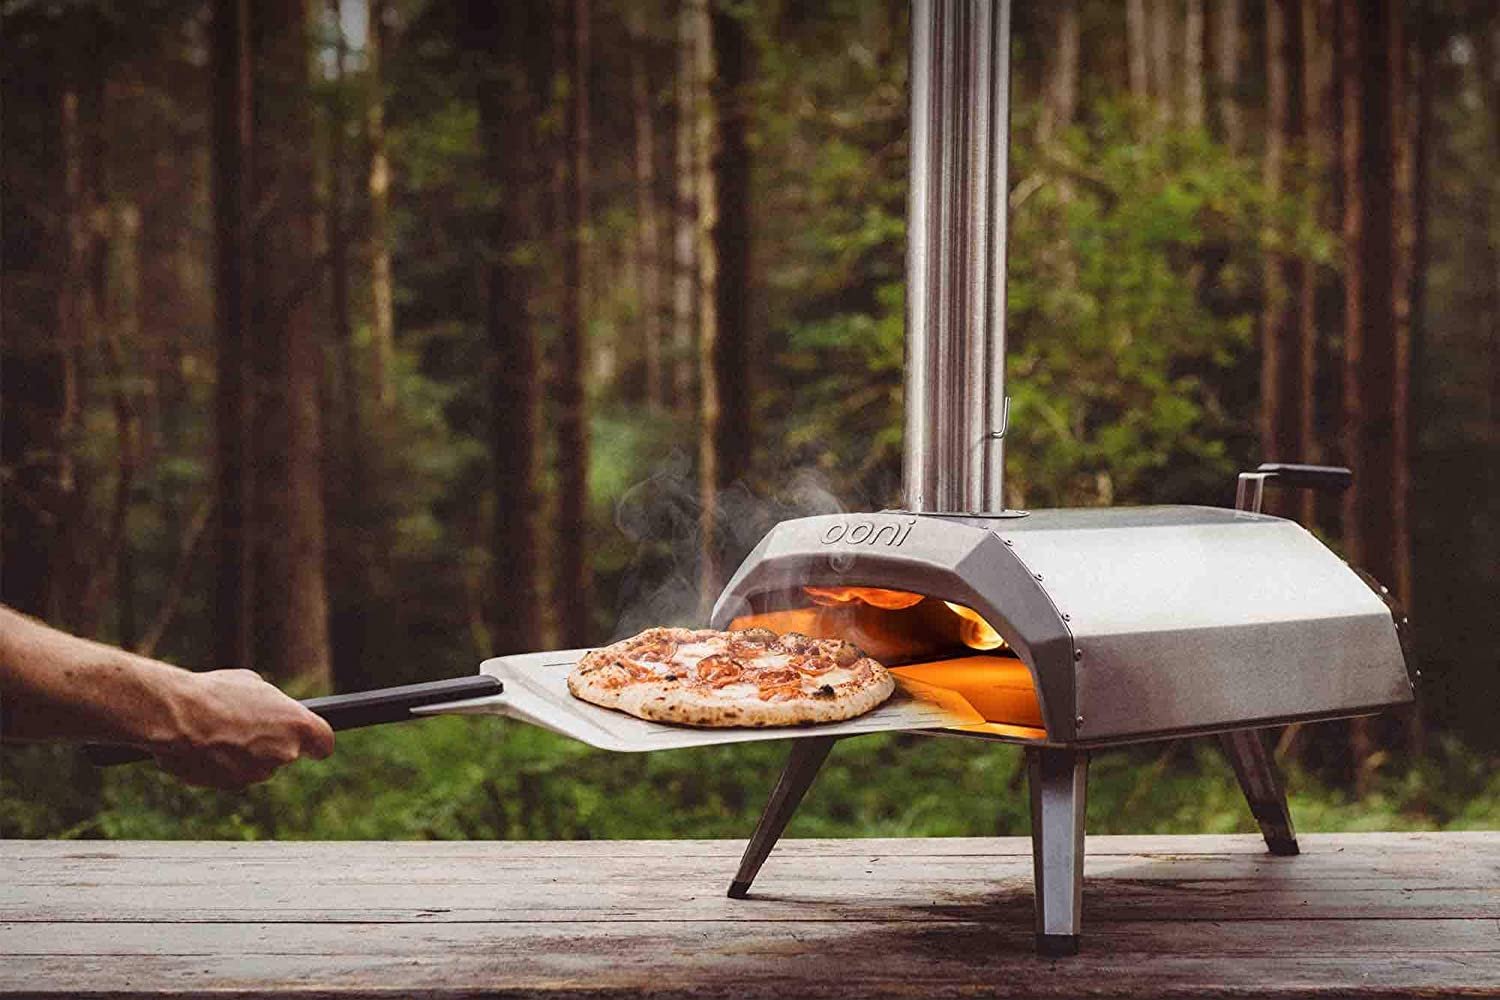 Ooni Karu 12 Portable Outdoor Pizza Oven